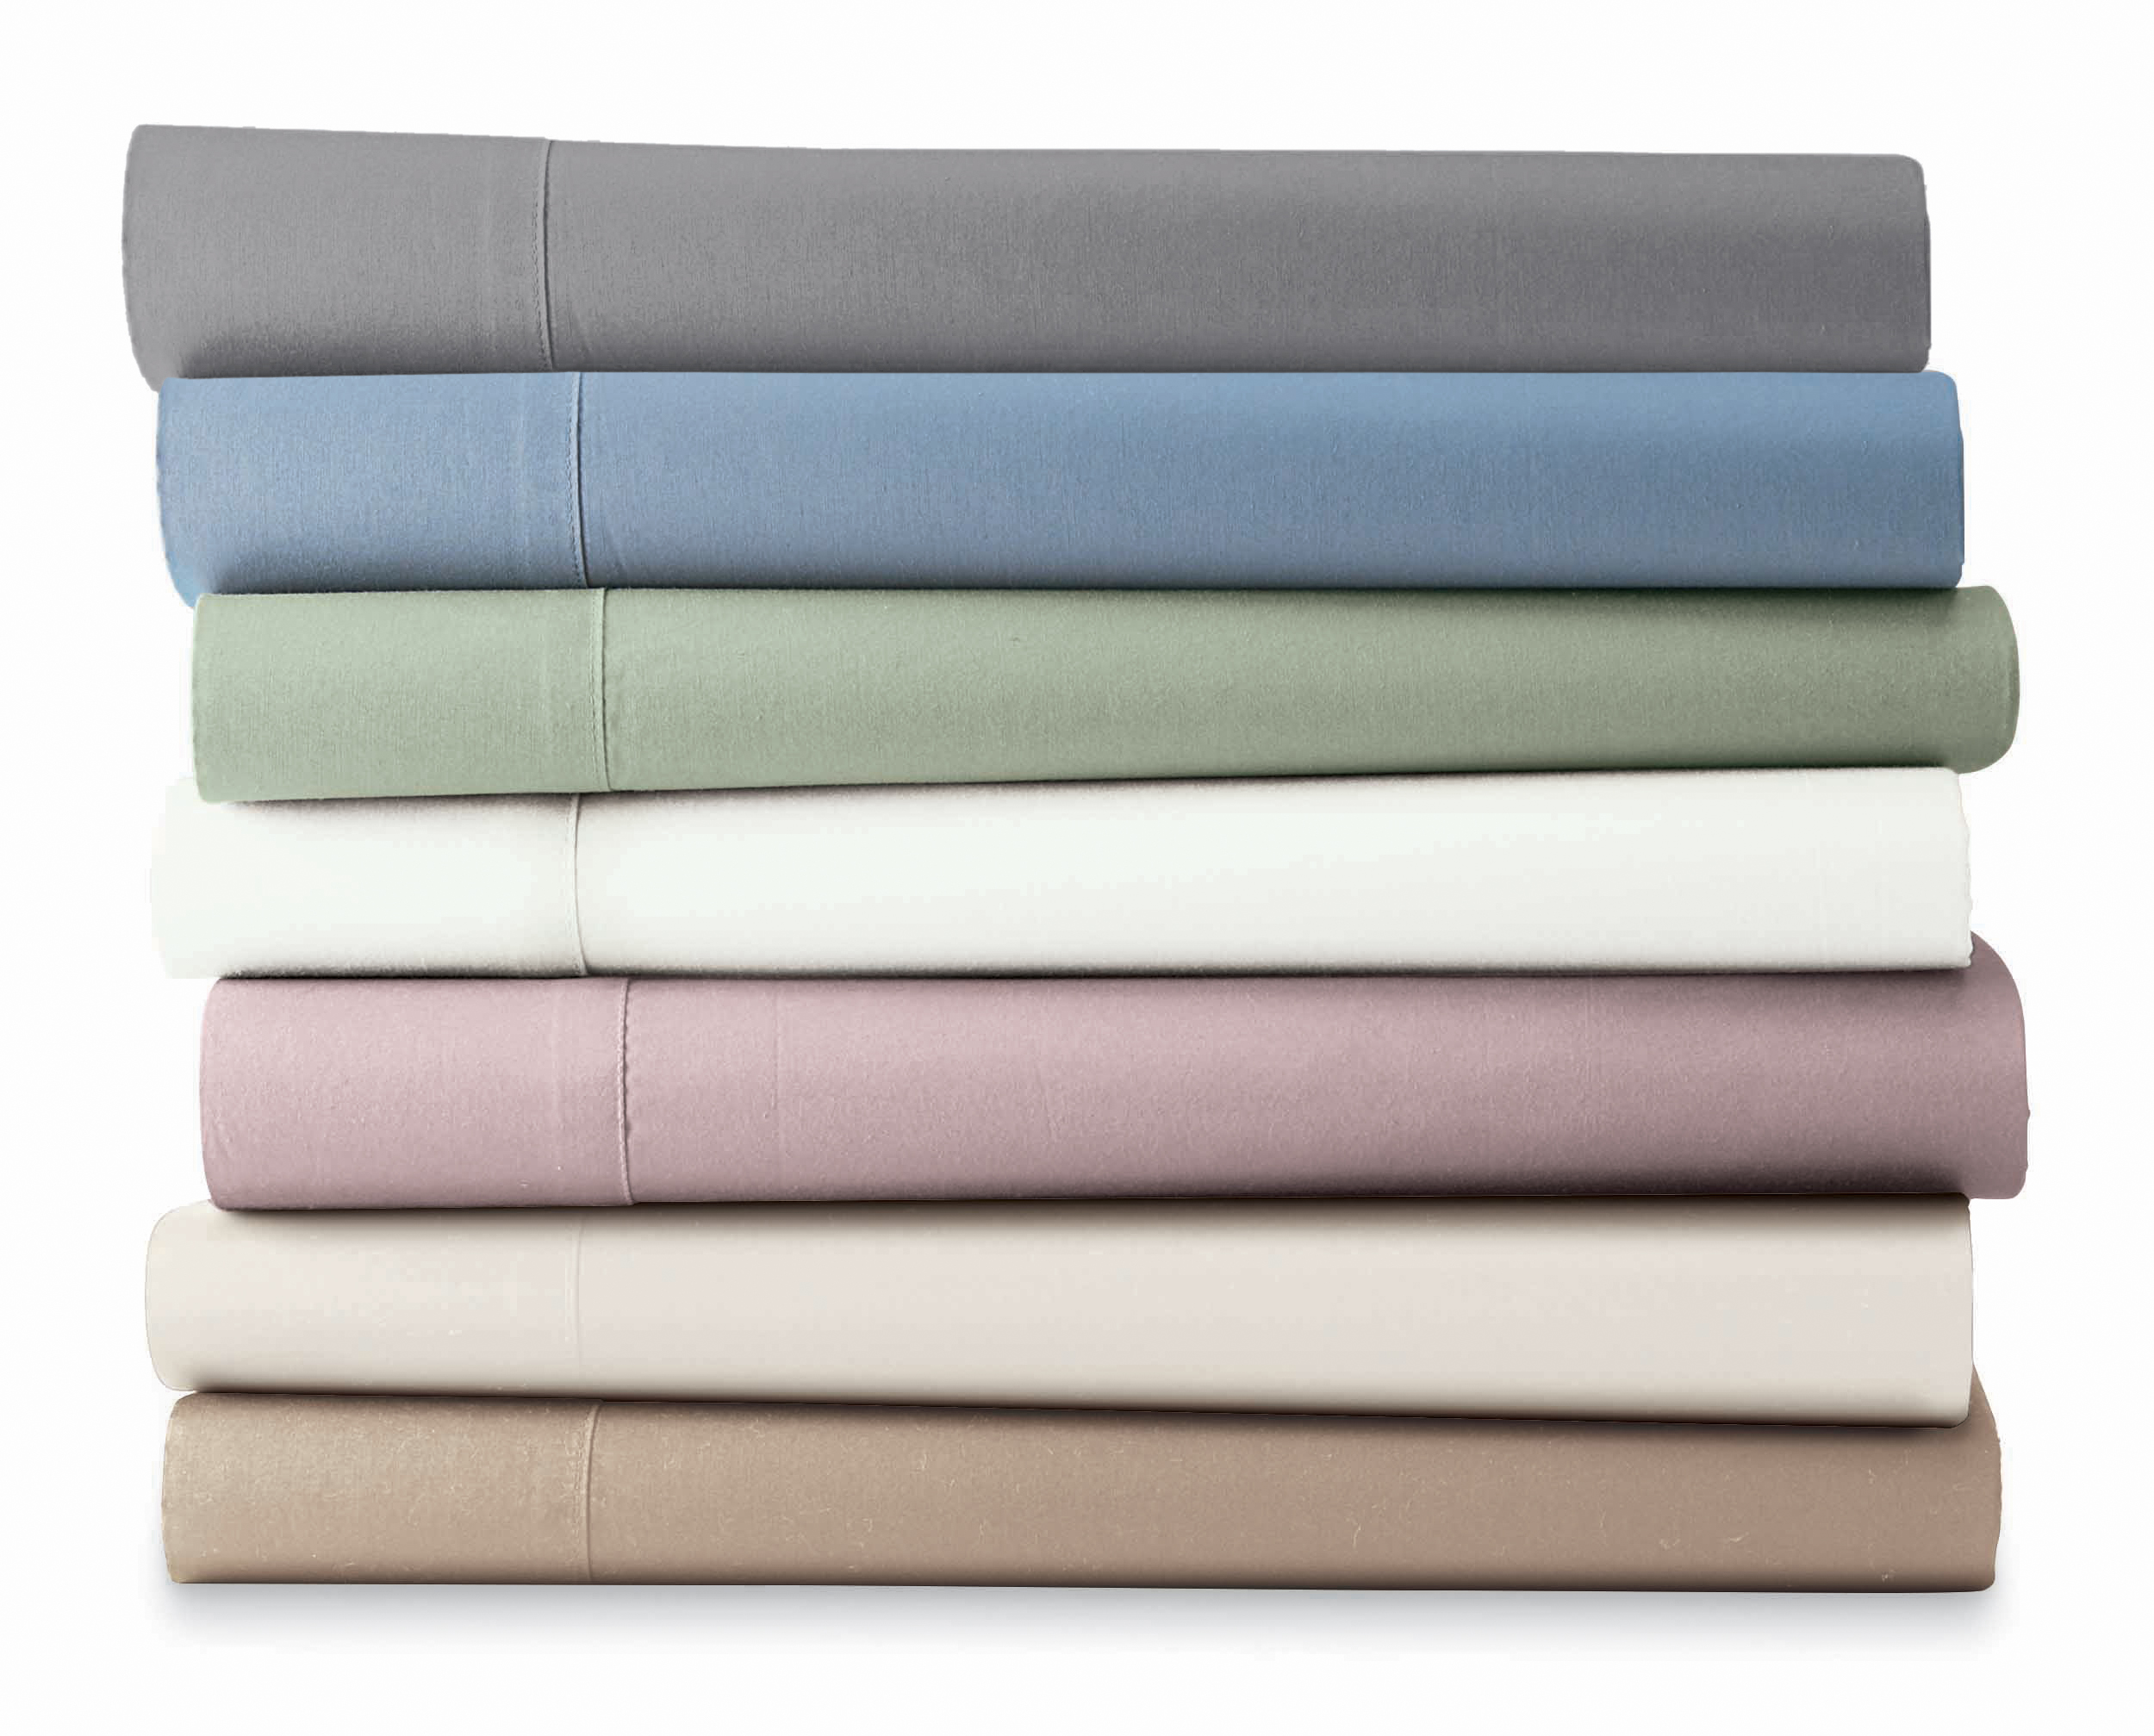 Cannon  300 Thread Count Sheet Sets additional pillowcases sold separately